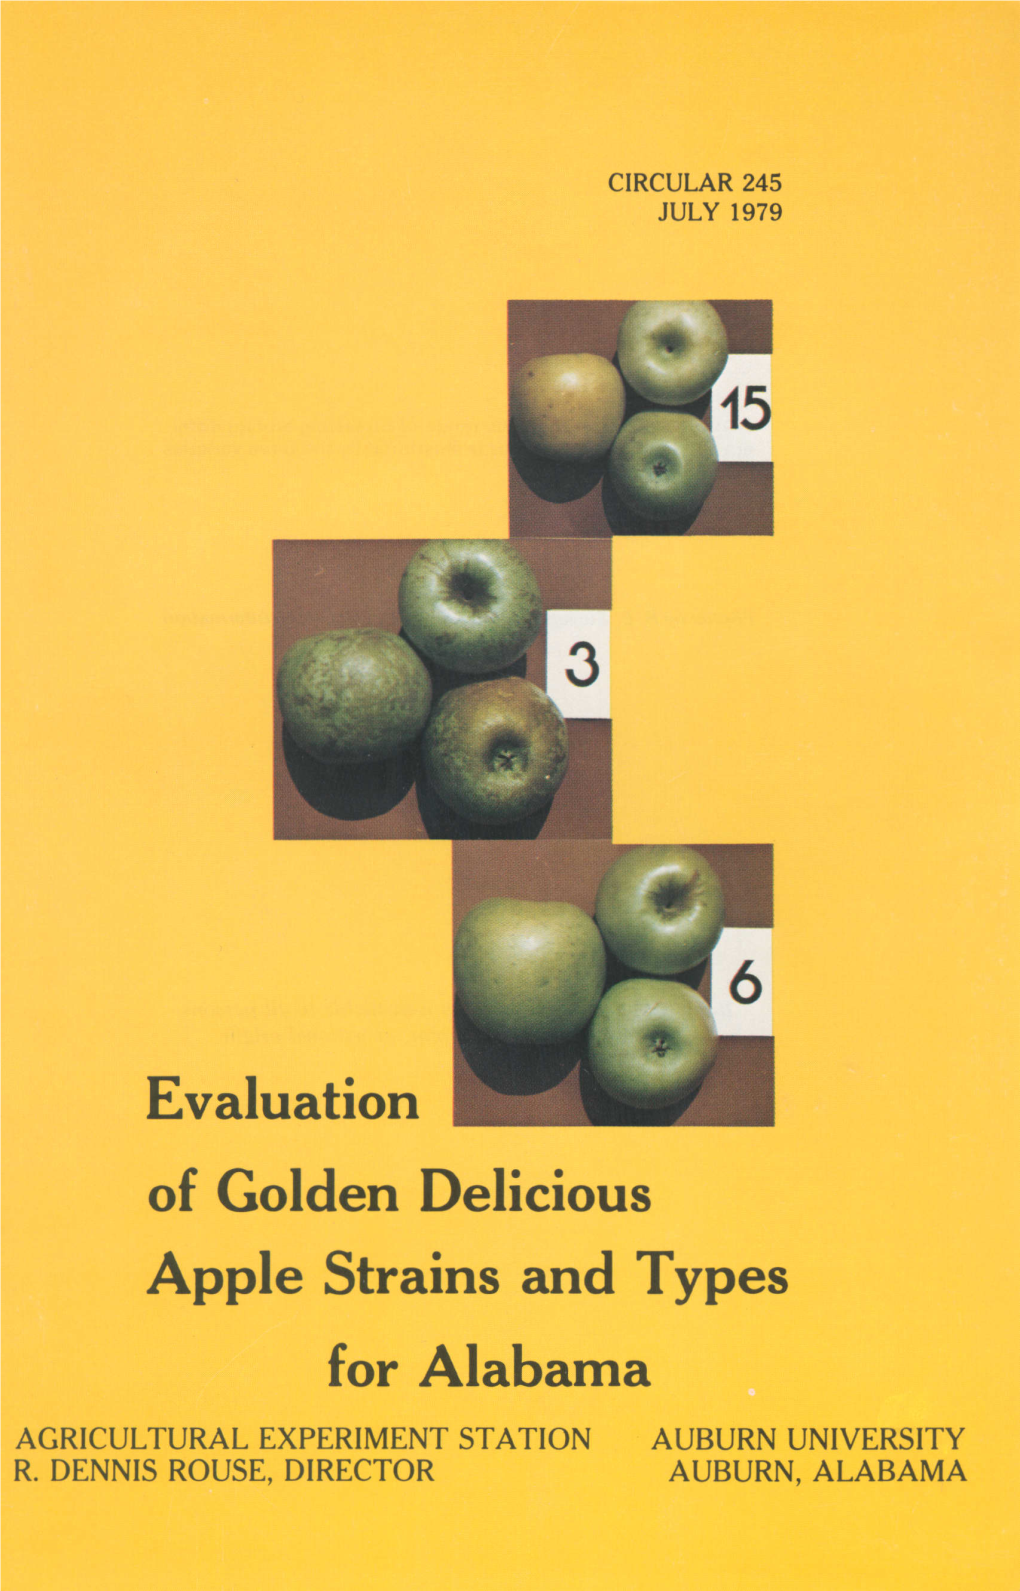 Evaluation of Golden Delicious Apple Strains and Types for Alabama AGRICULTURAL EXPERIMENT STATION AUBURN UNIVERSITY R